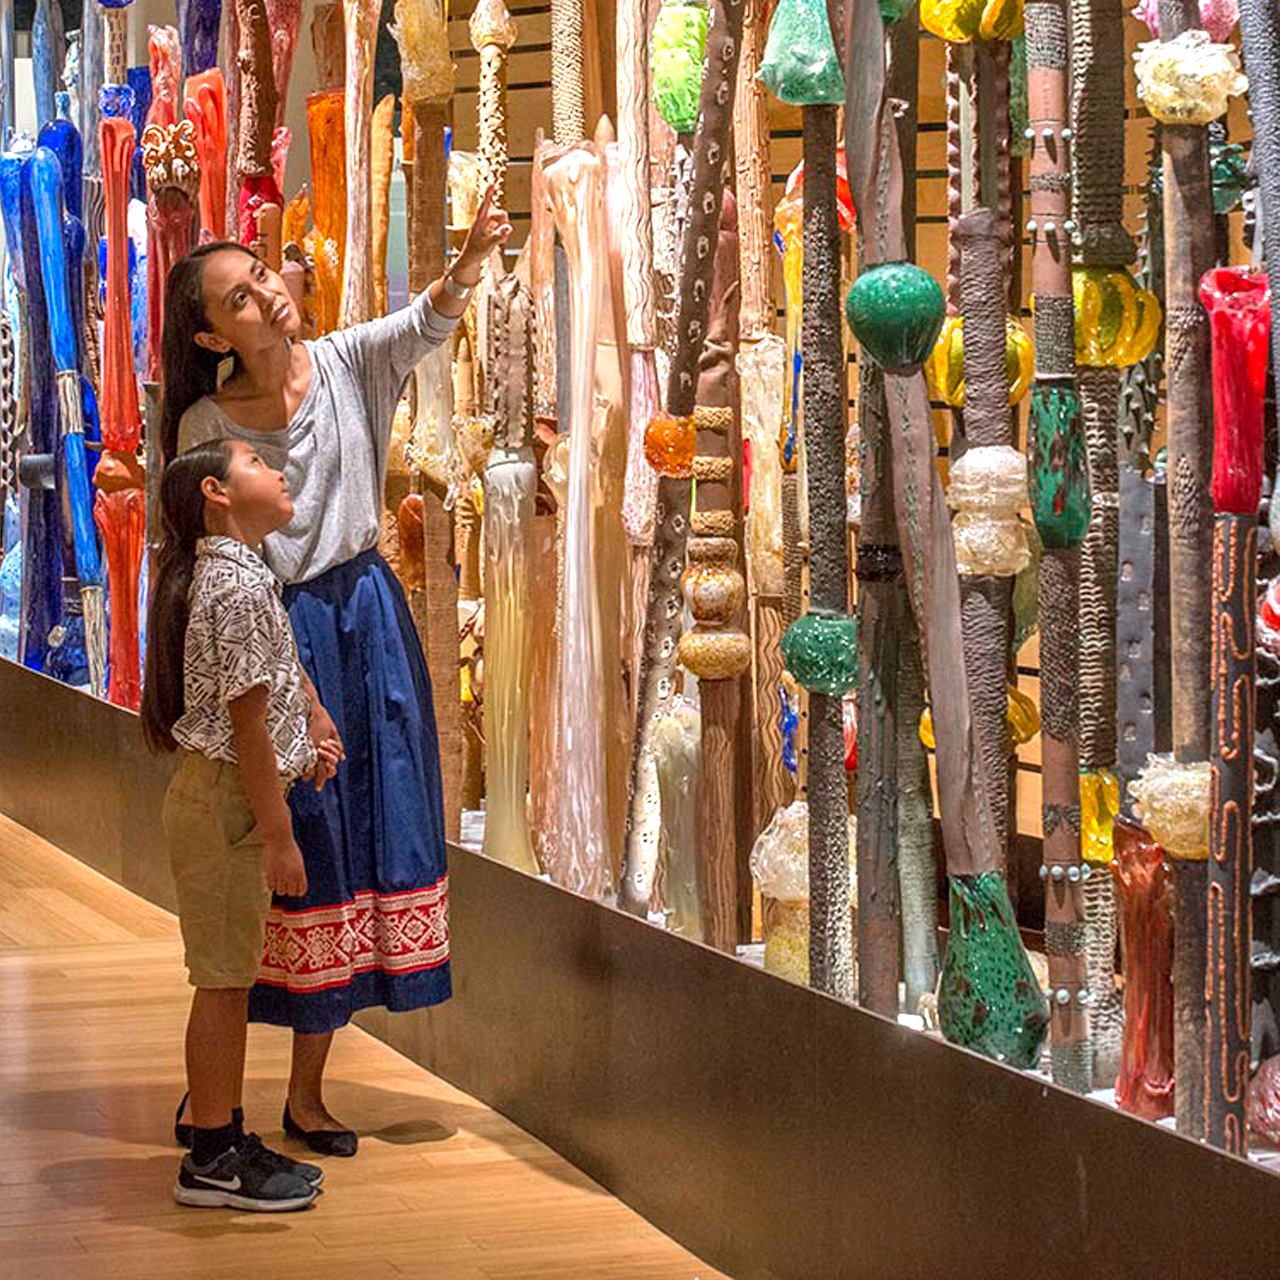 A woman and a child looking at a display of colorful sticks known as Art Fence.